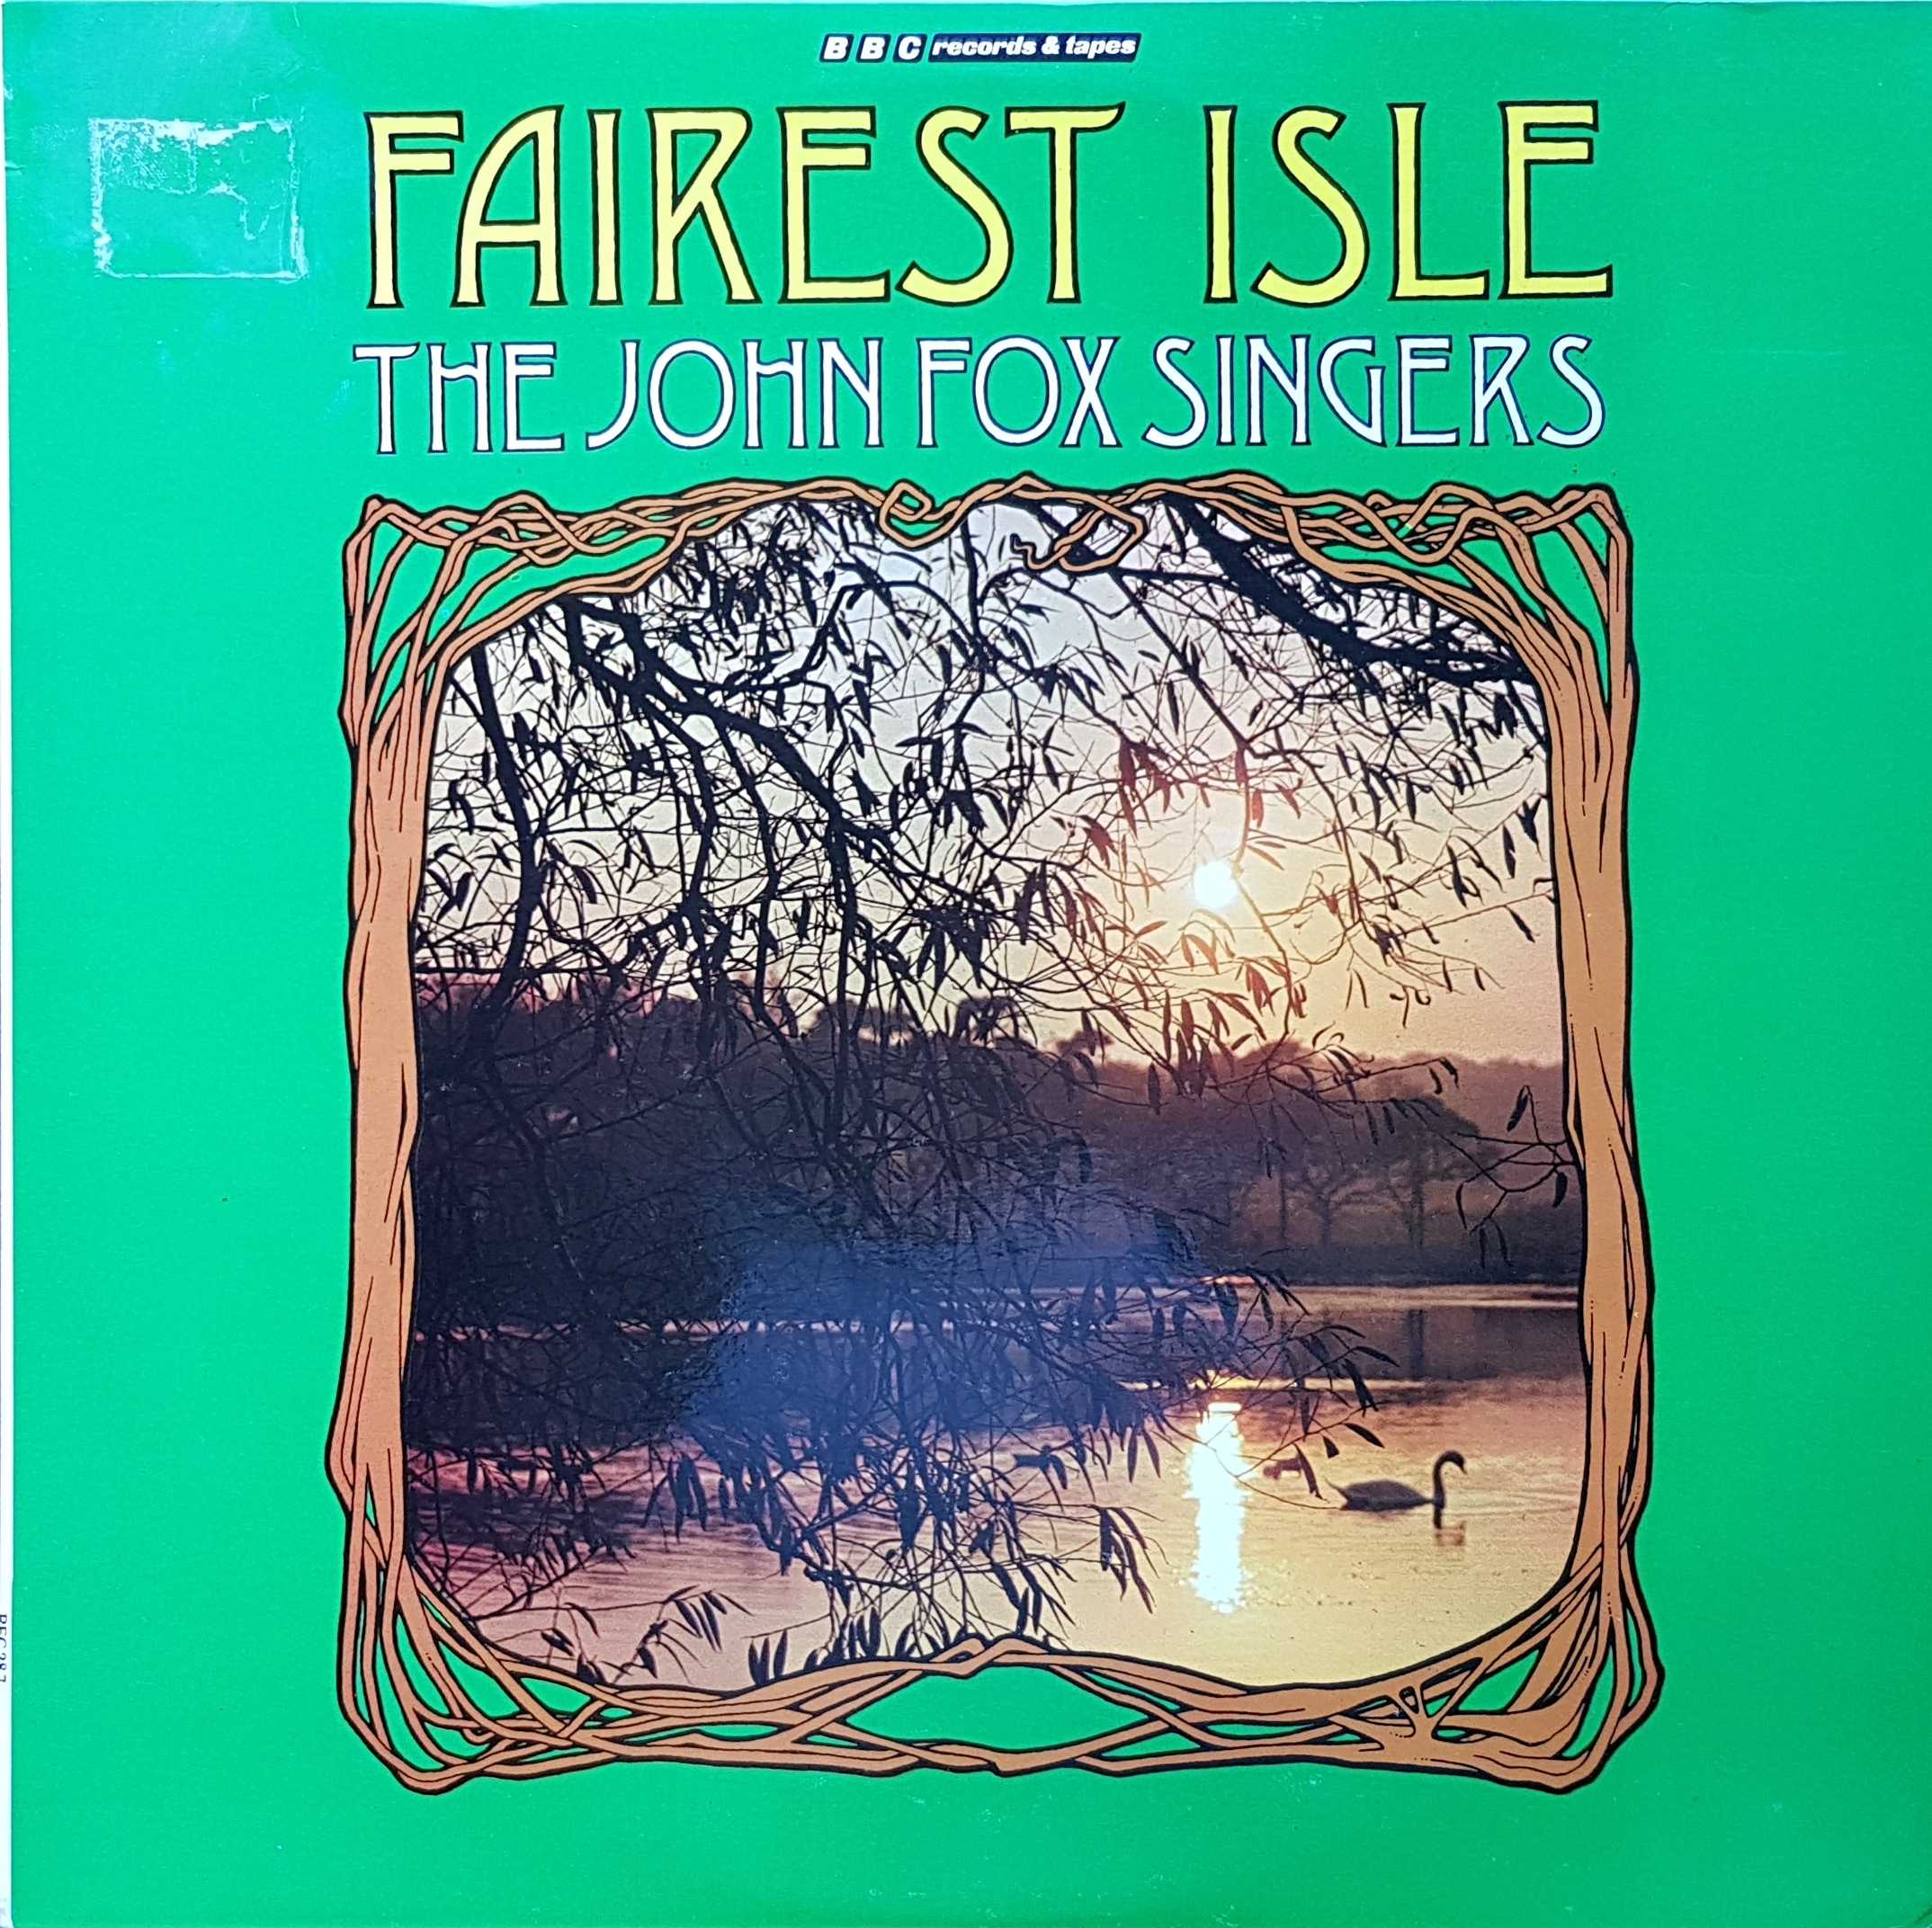 Picture of REC 287 Fairest isle by artist John Fox singers from the BBC albums - Records and Tapes library